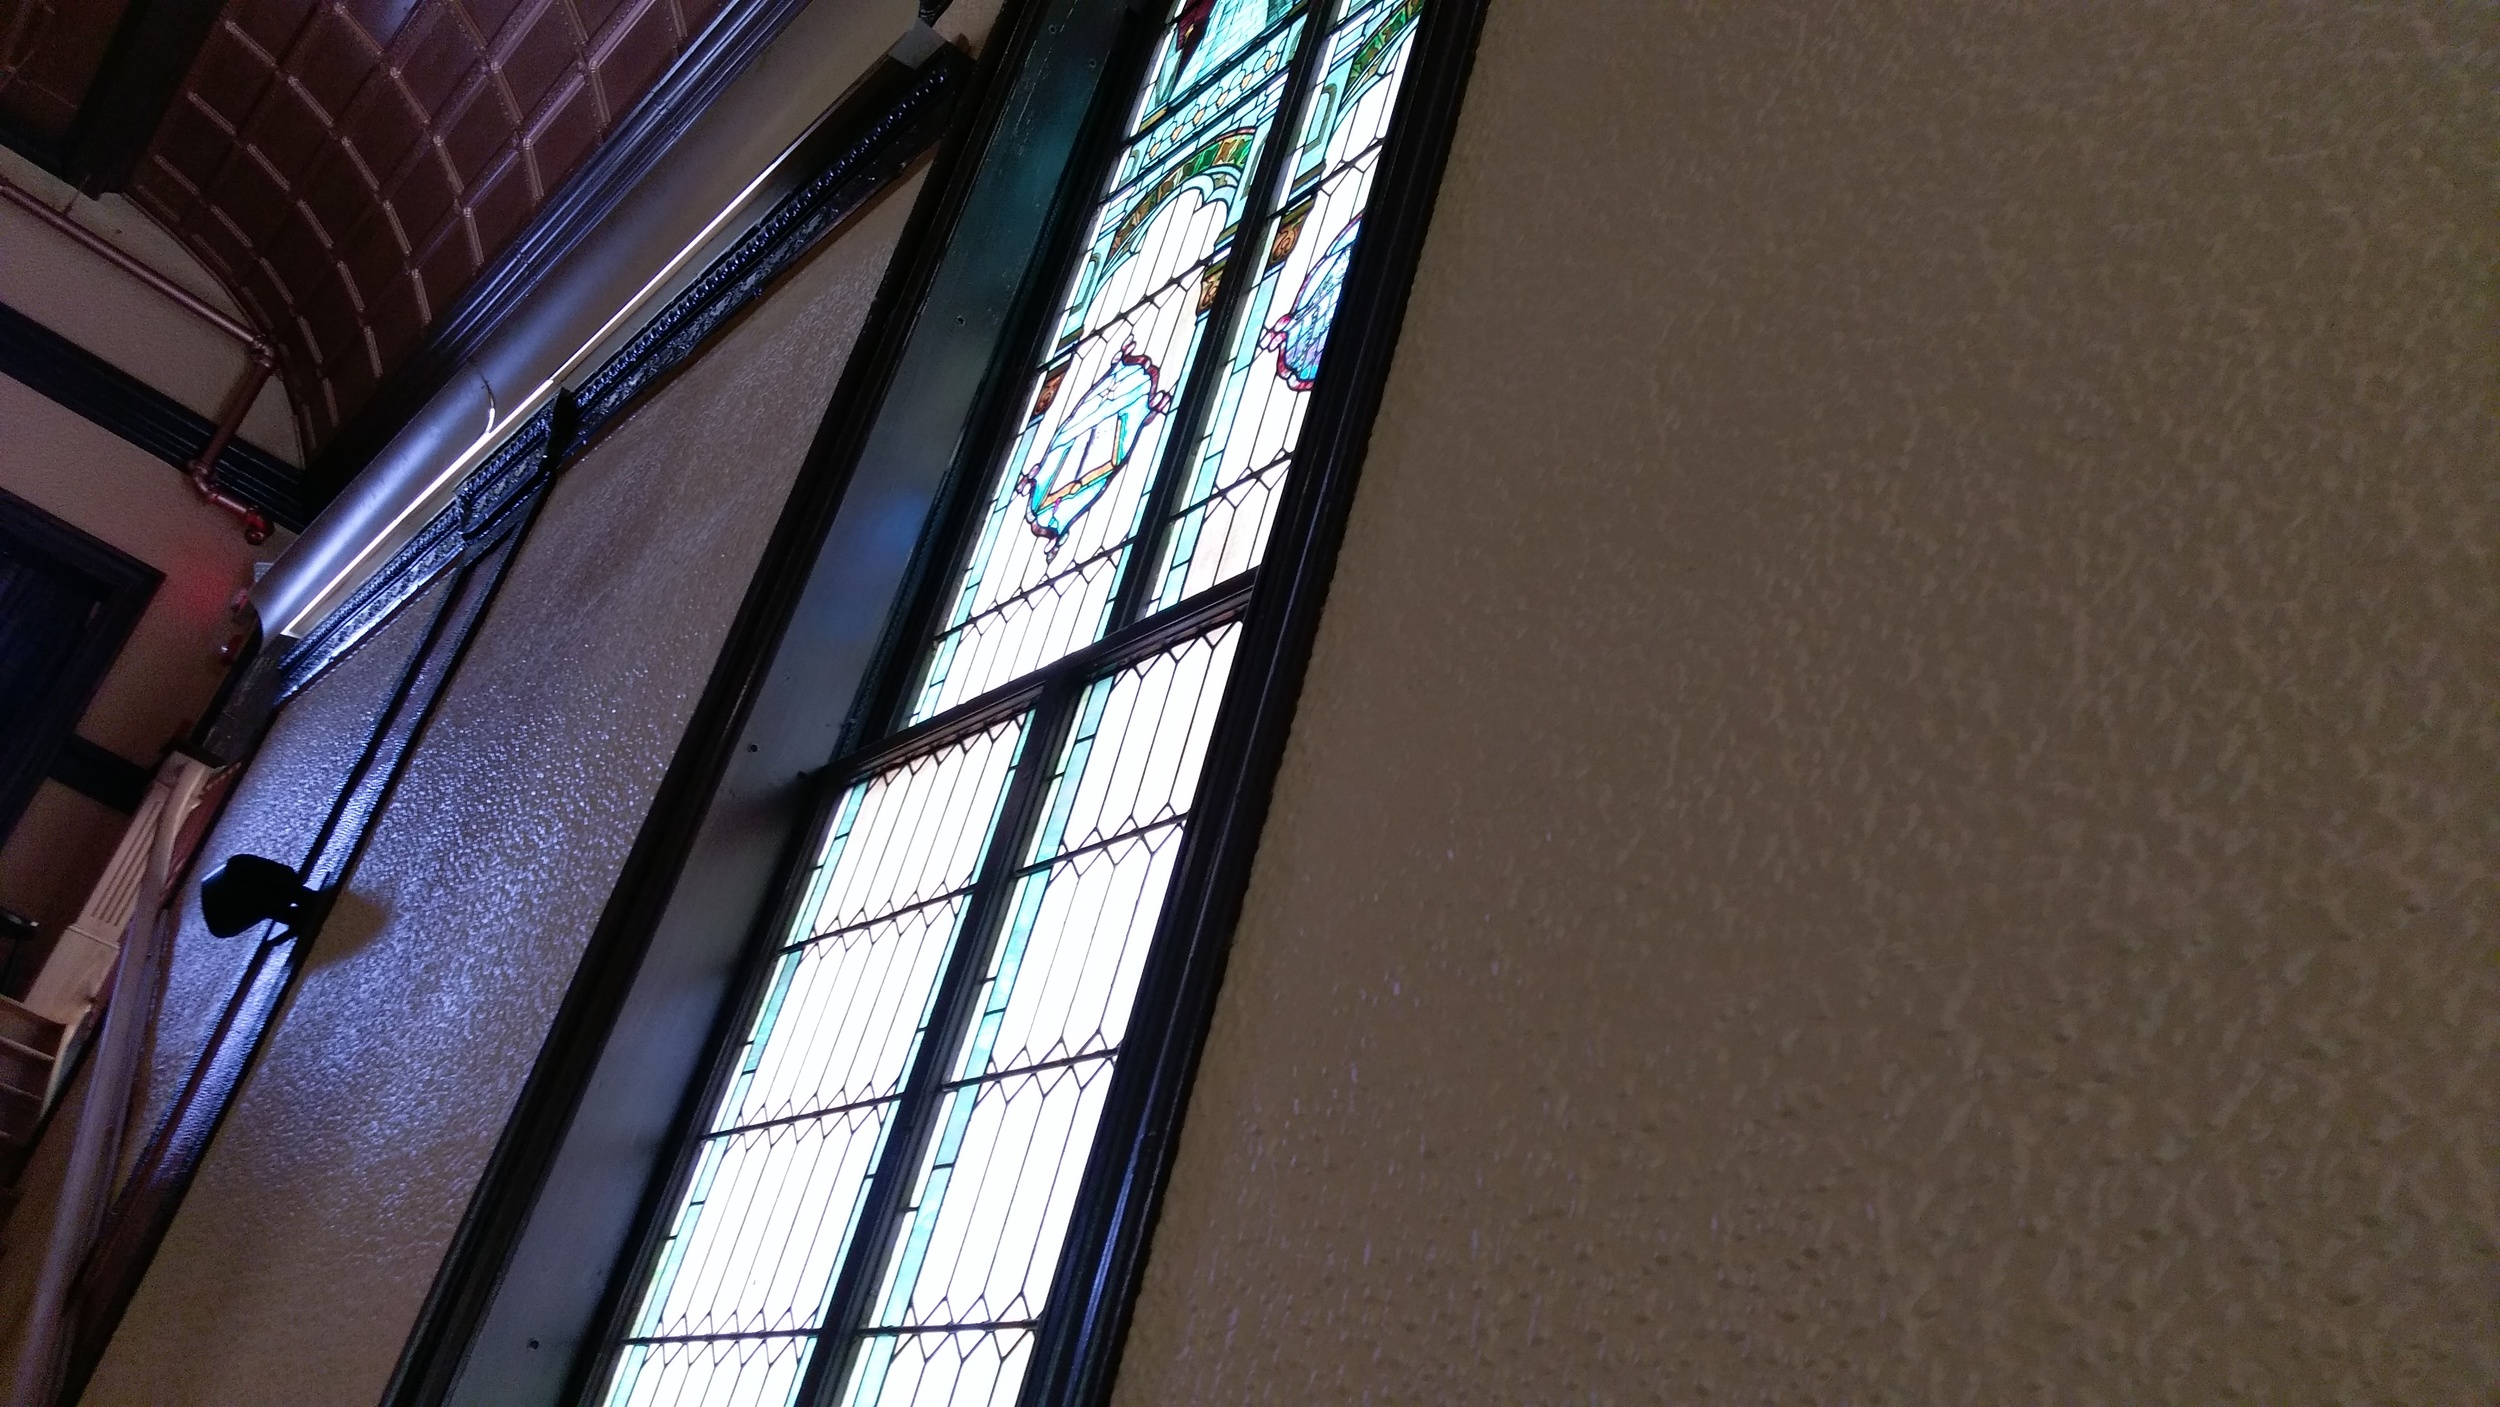 Cool stained glass windows